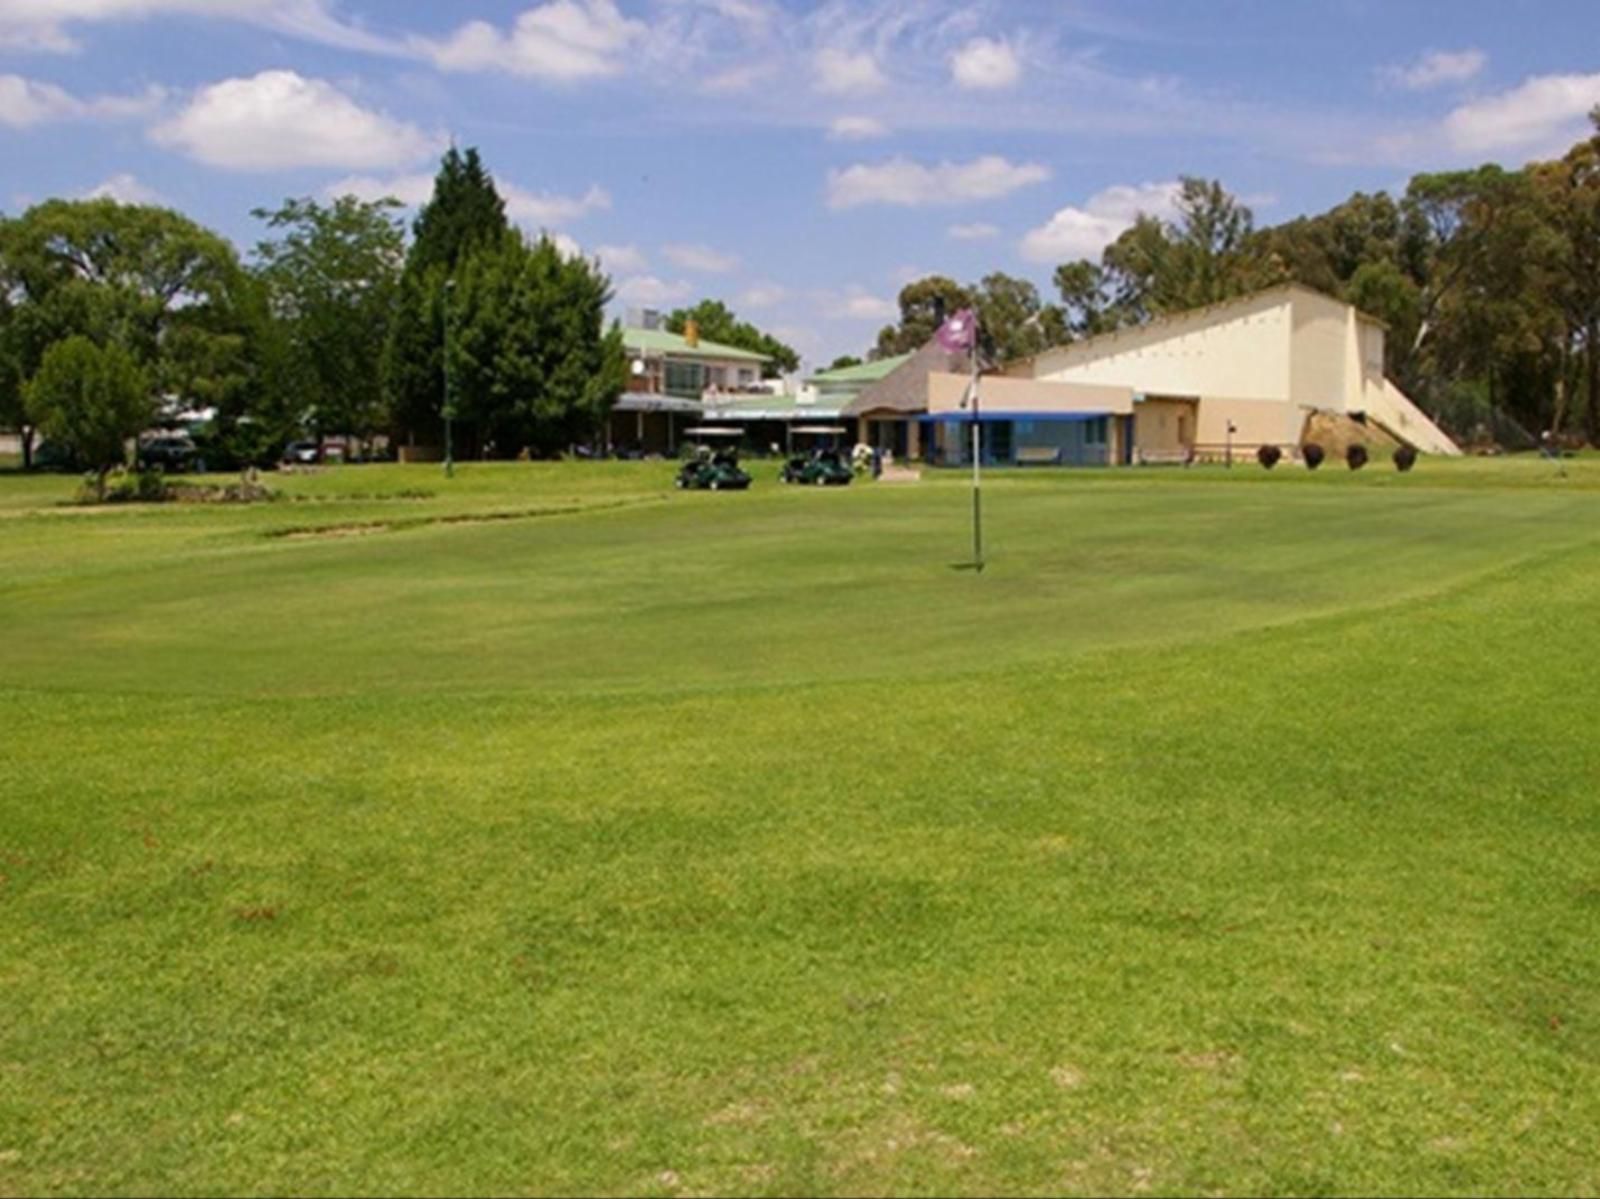 Green Olive Residences Bethlehem Free State South Africa Complementary Colors, Ball Game, Sport, Golfing